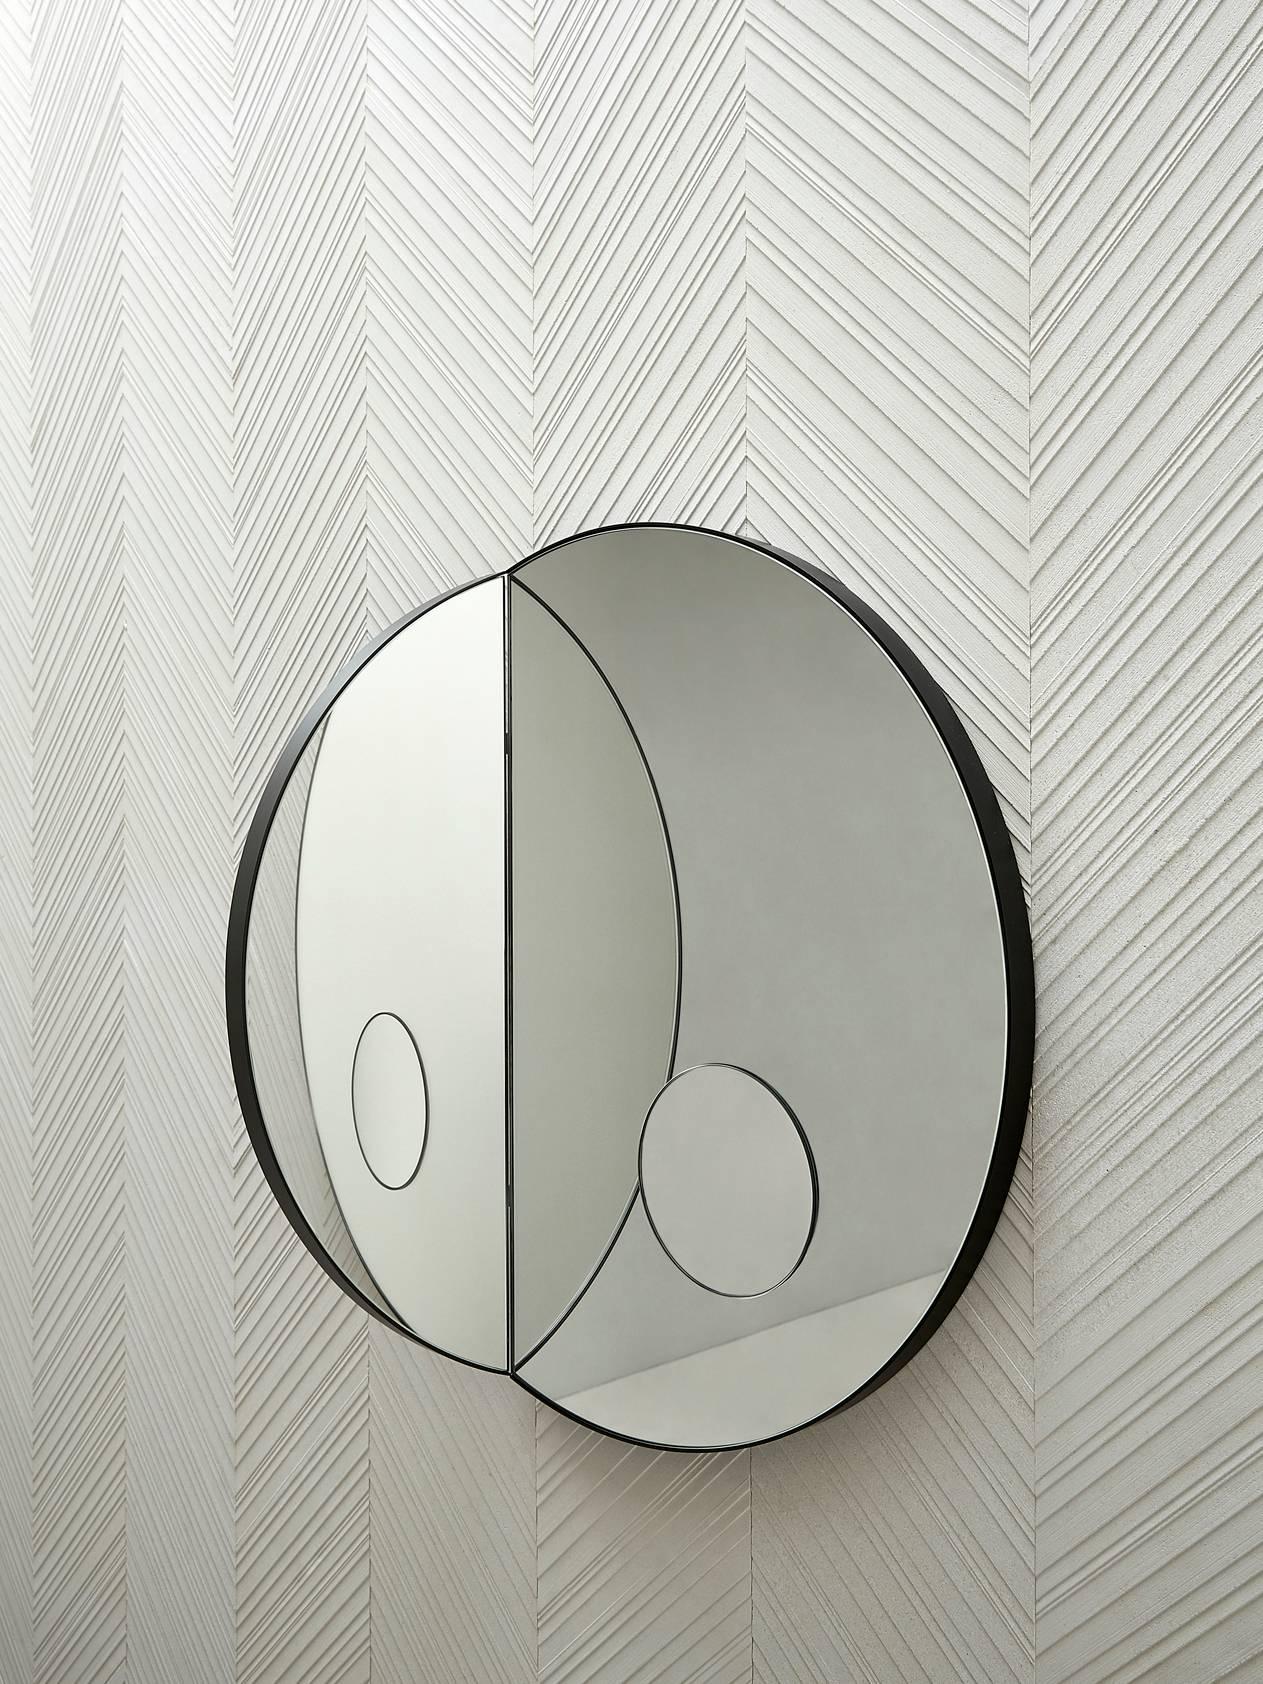 Salvatori Circular Archimede Mirror with Gun-Metal Steel Frame by Elisa Ossino In New Condition For Sale In Querceta, IT